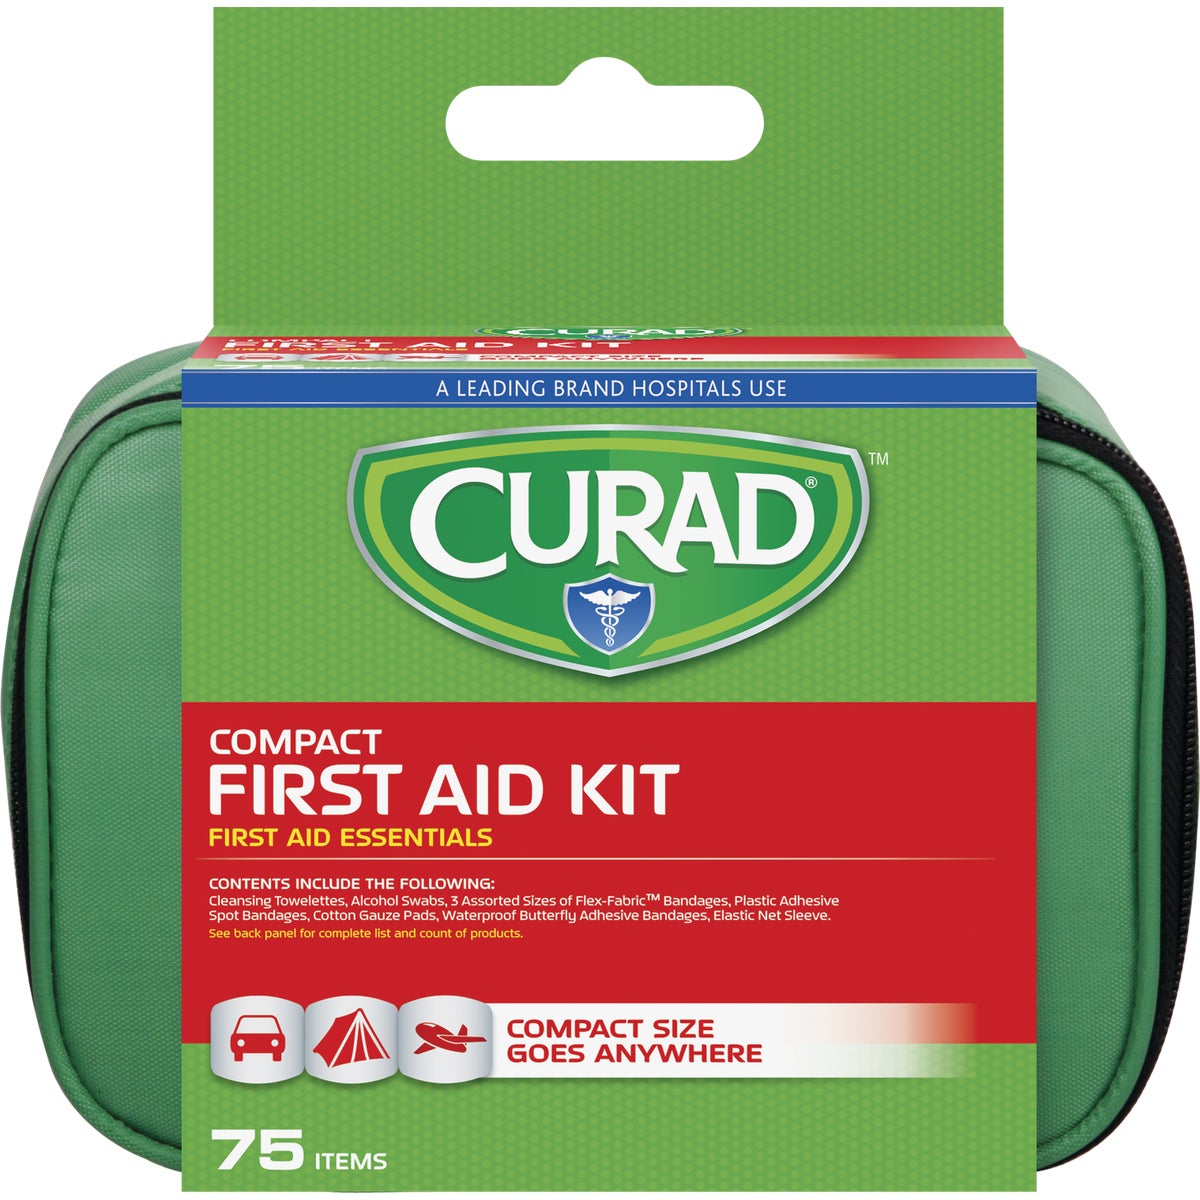 Item 602239, Kit contains essential Curad brand first aid items including latex-free 